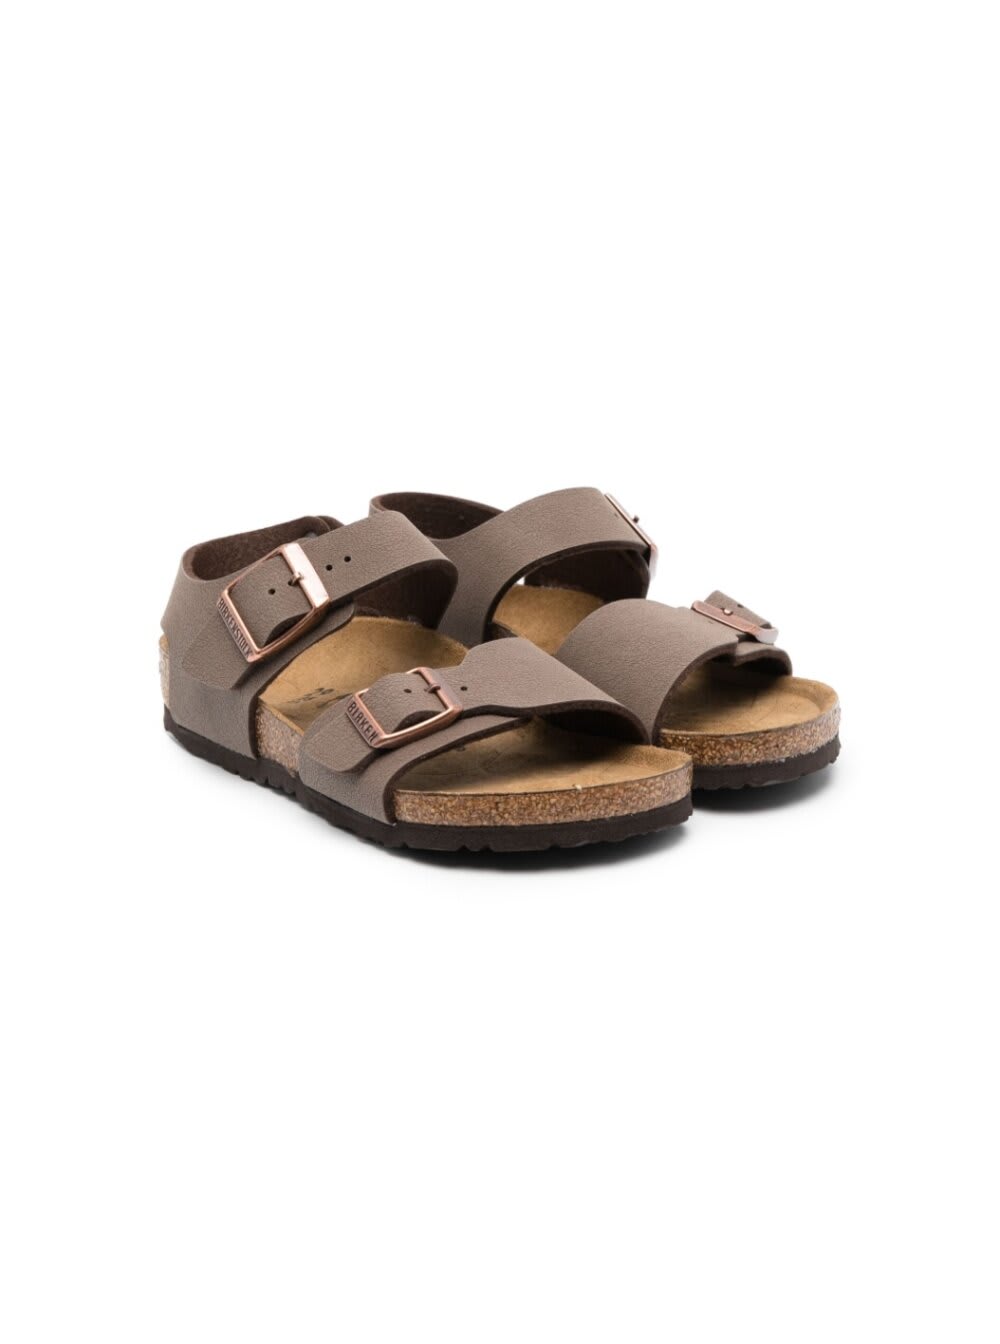 BIRKENSTOCK NEW YORK BROWN SANDALS WITH DOUBLE BUCKLES IN FAUX LEATHER BOY